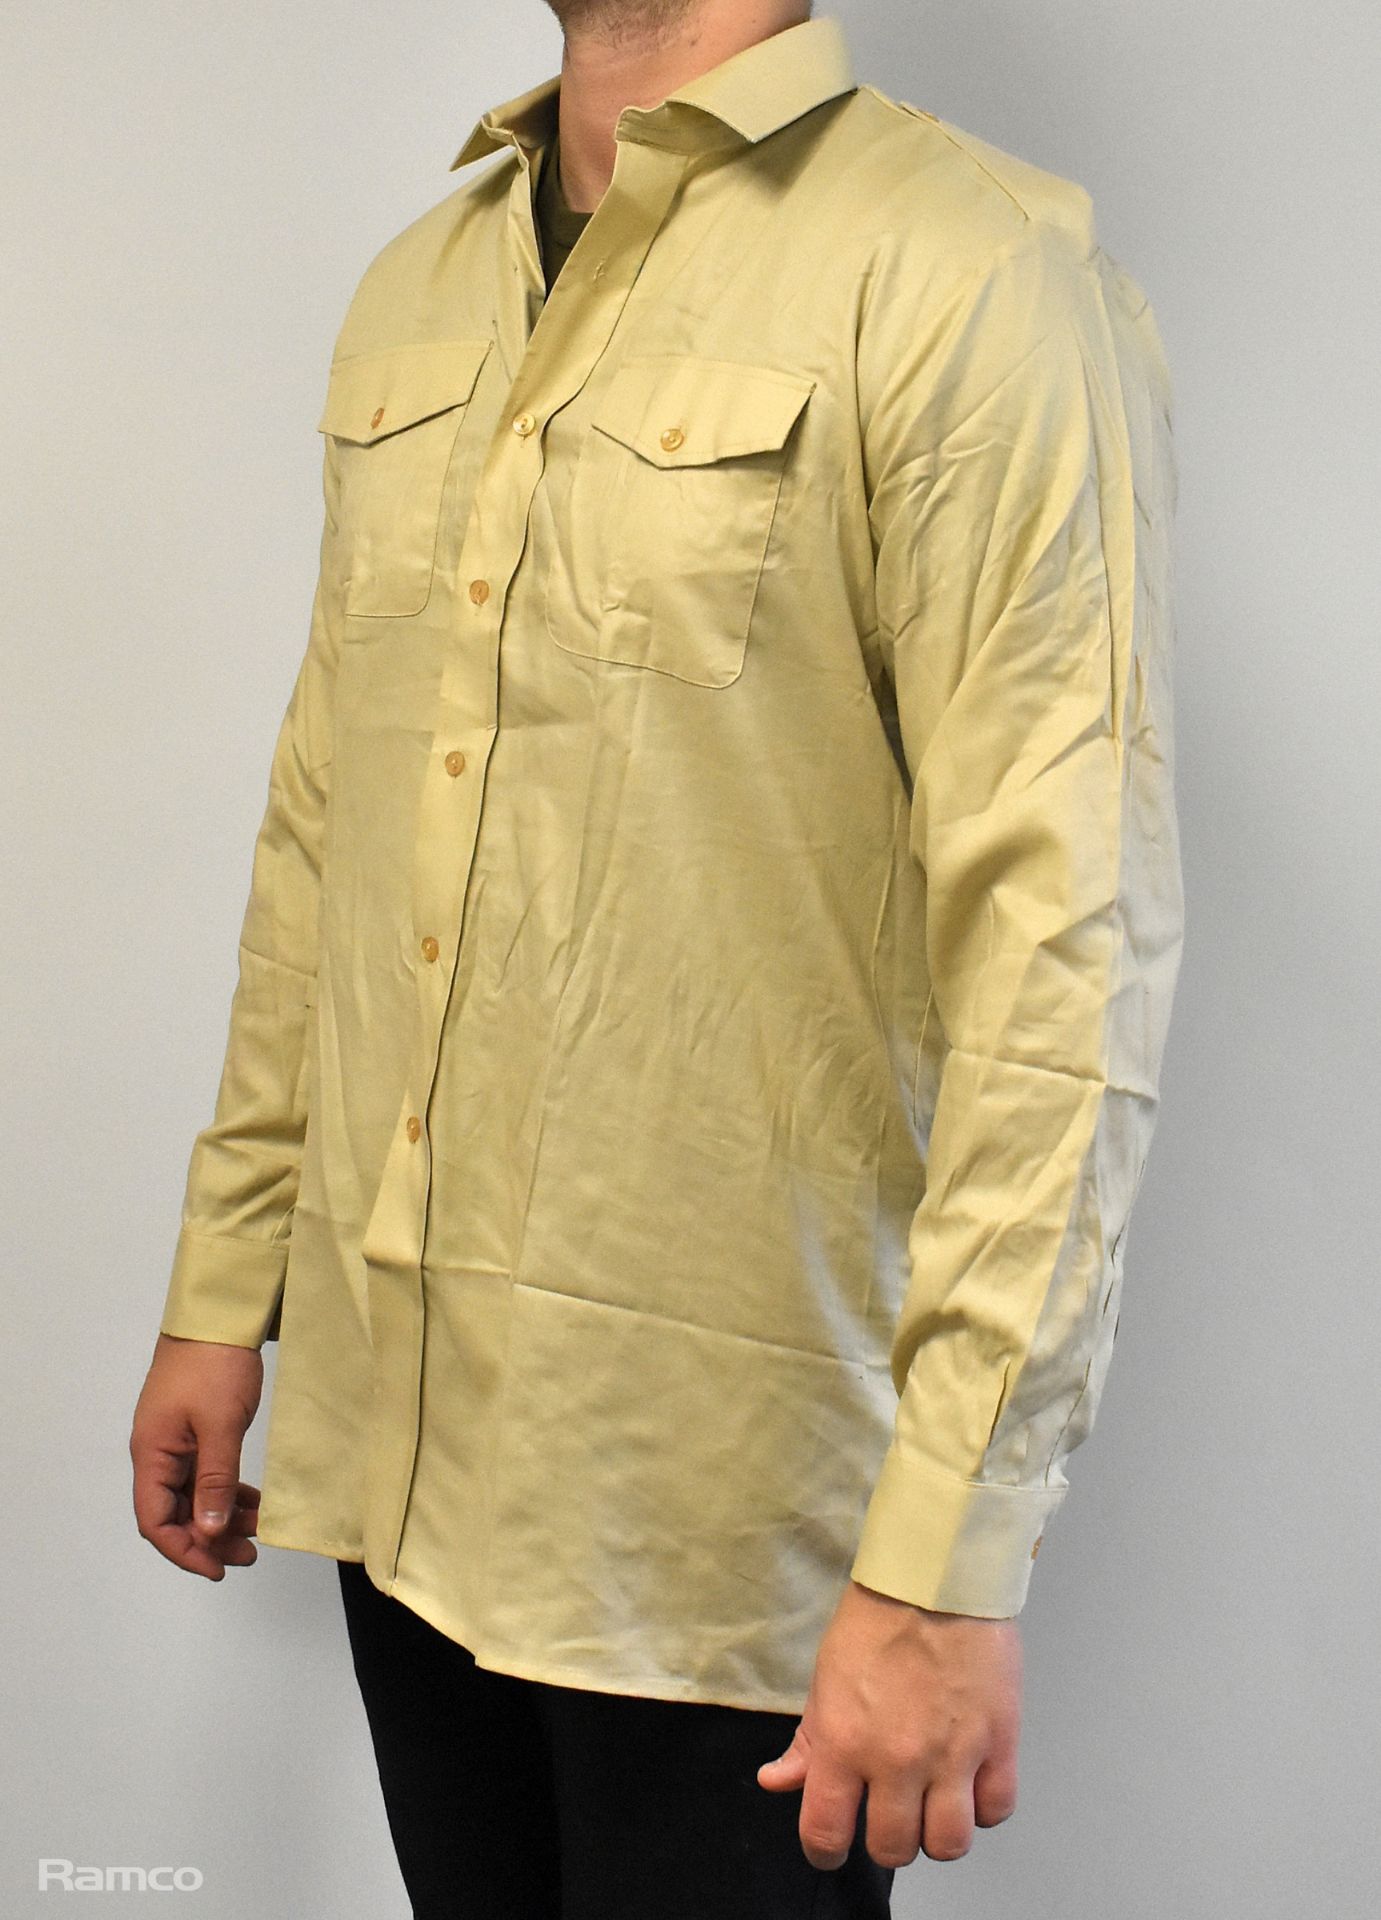 90x British Army Fawn shirts long sleeve - mixed grades and sizes - Image 2 of 8